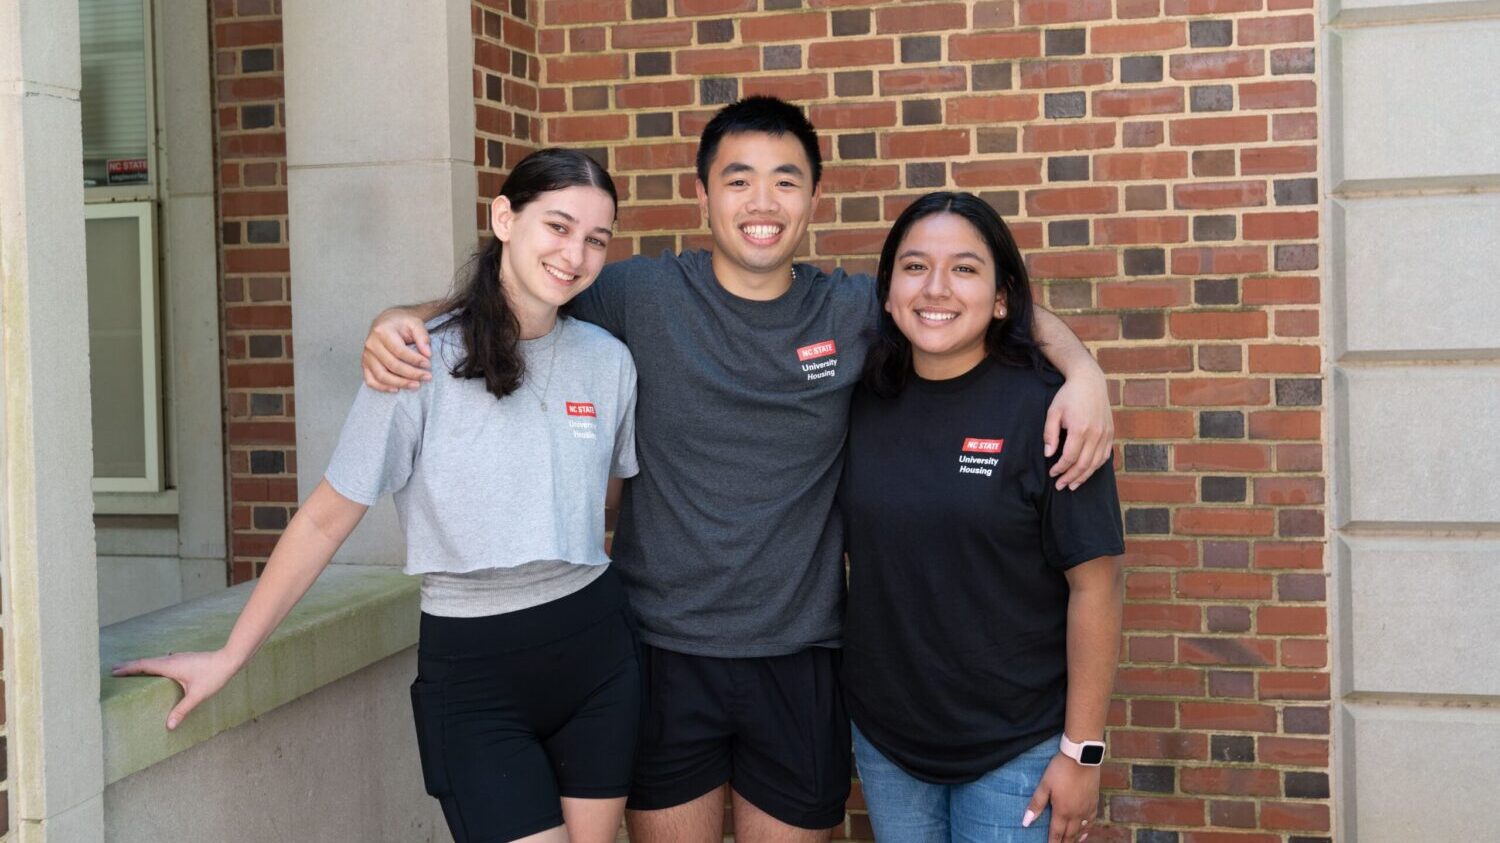 NC State University Housing Student Workers